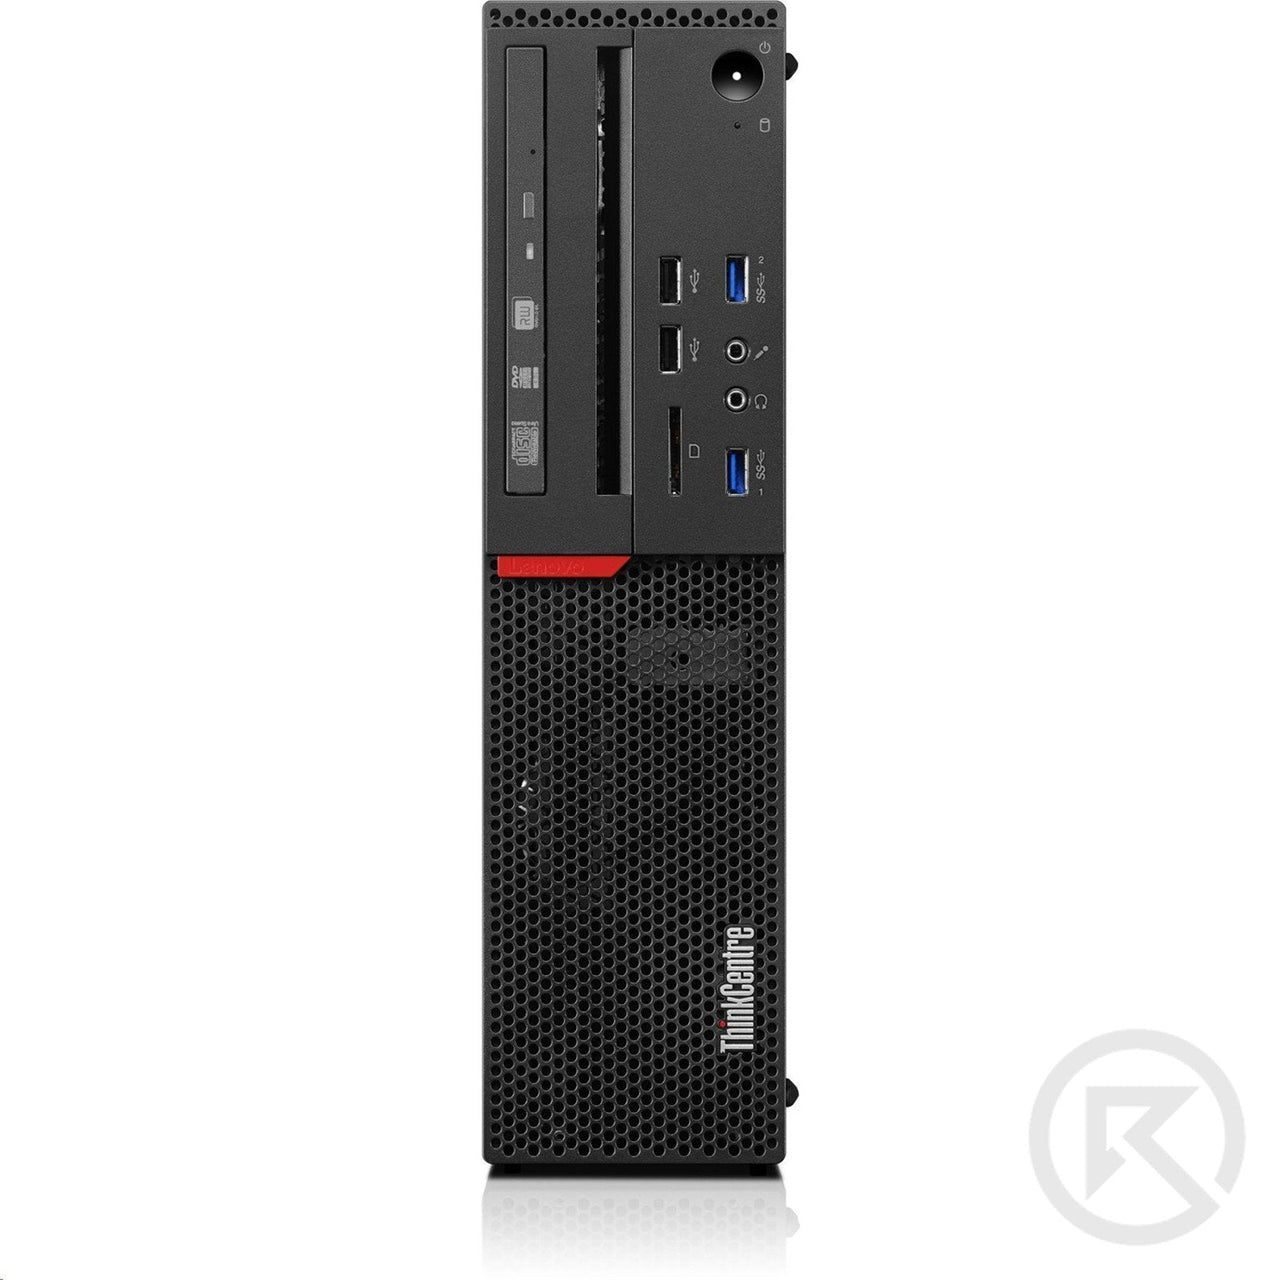 Lenovo Thinkcentre M700 Intel Core I3 6th Generation Small Form Factor-Computer-RefurbConnect-Refurbished-Computers-Laptops-Printers-New York